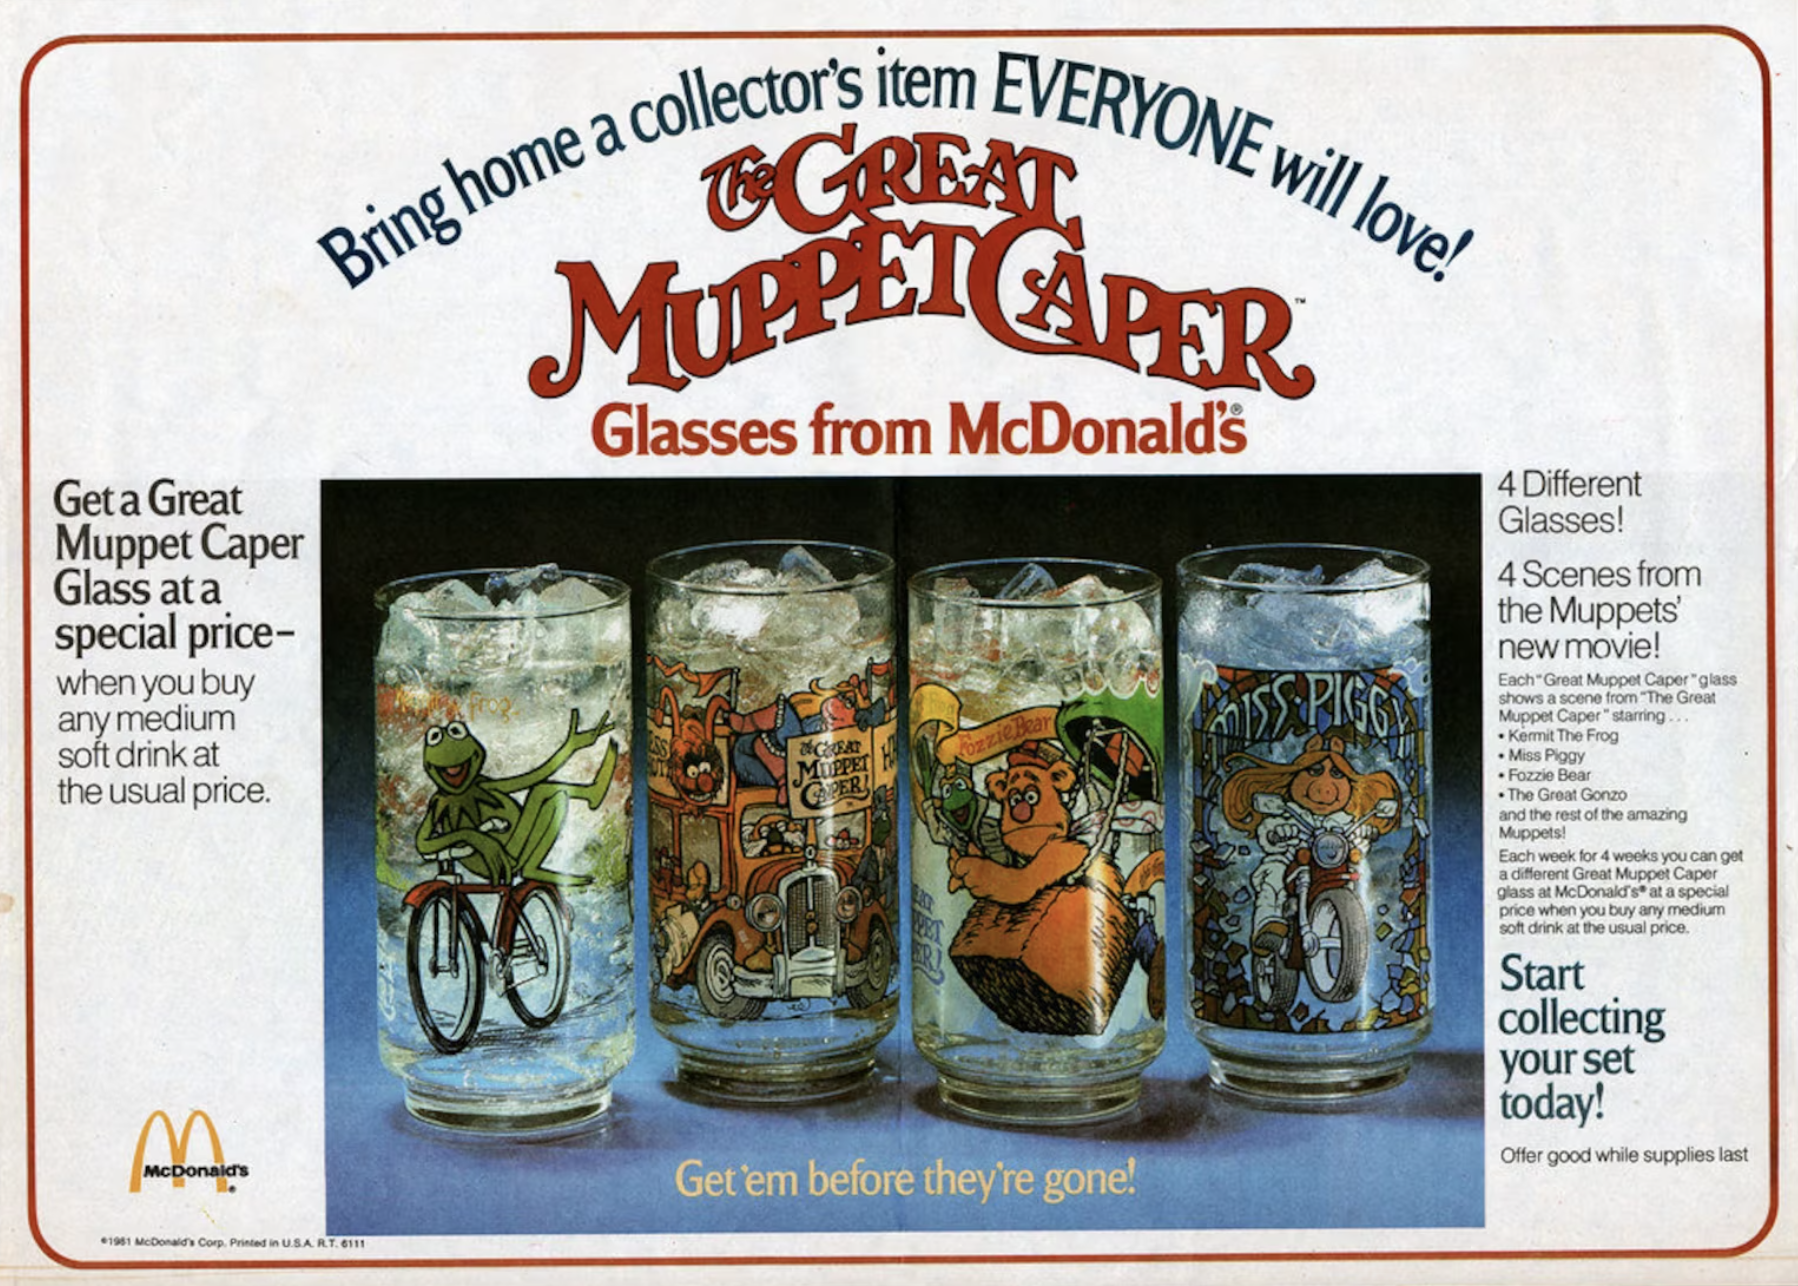 A McDonald’s advertisement featuring glasses with varying characters from the Muppets.